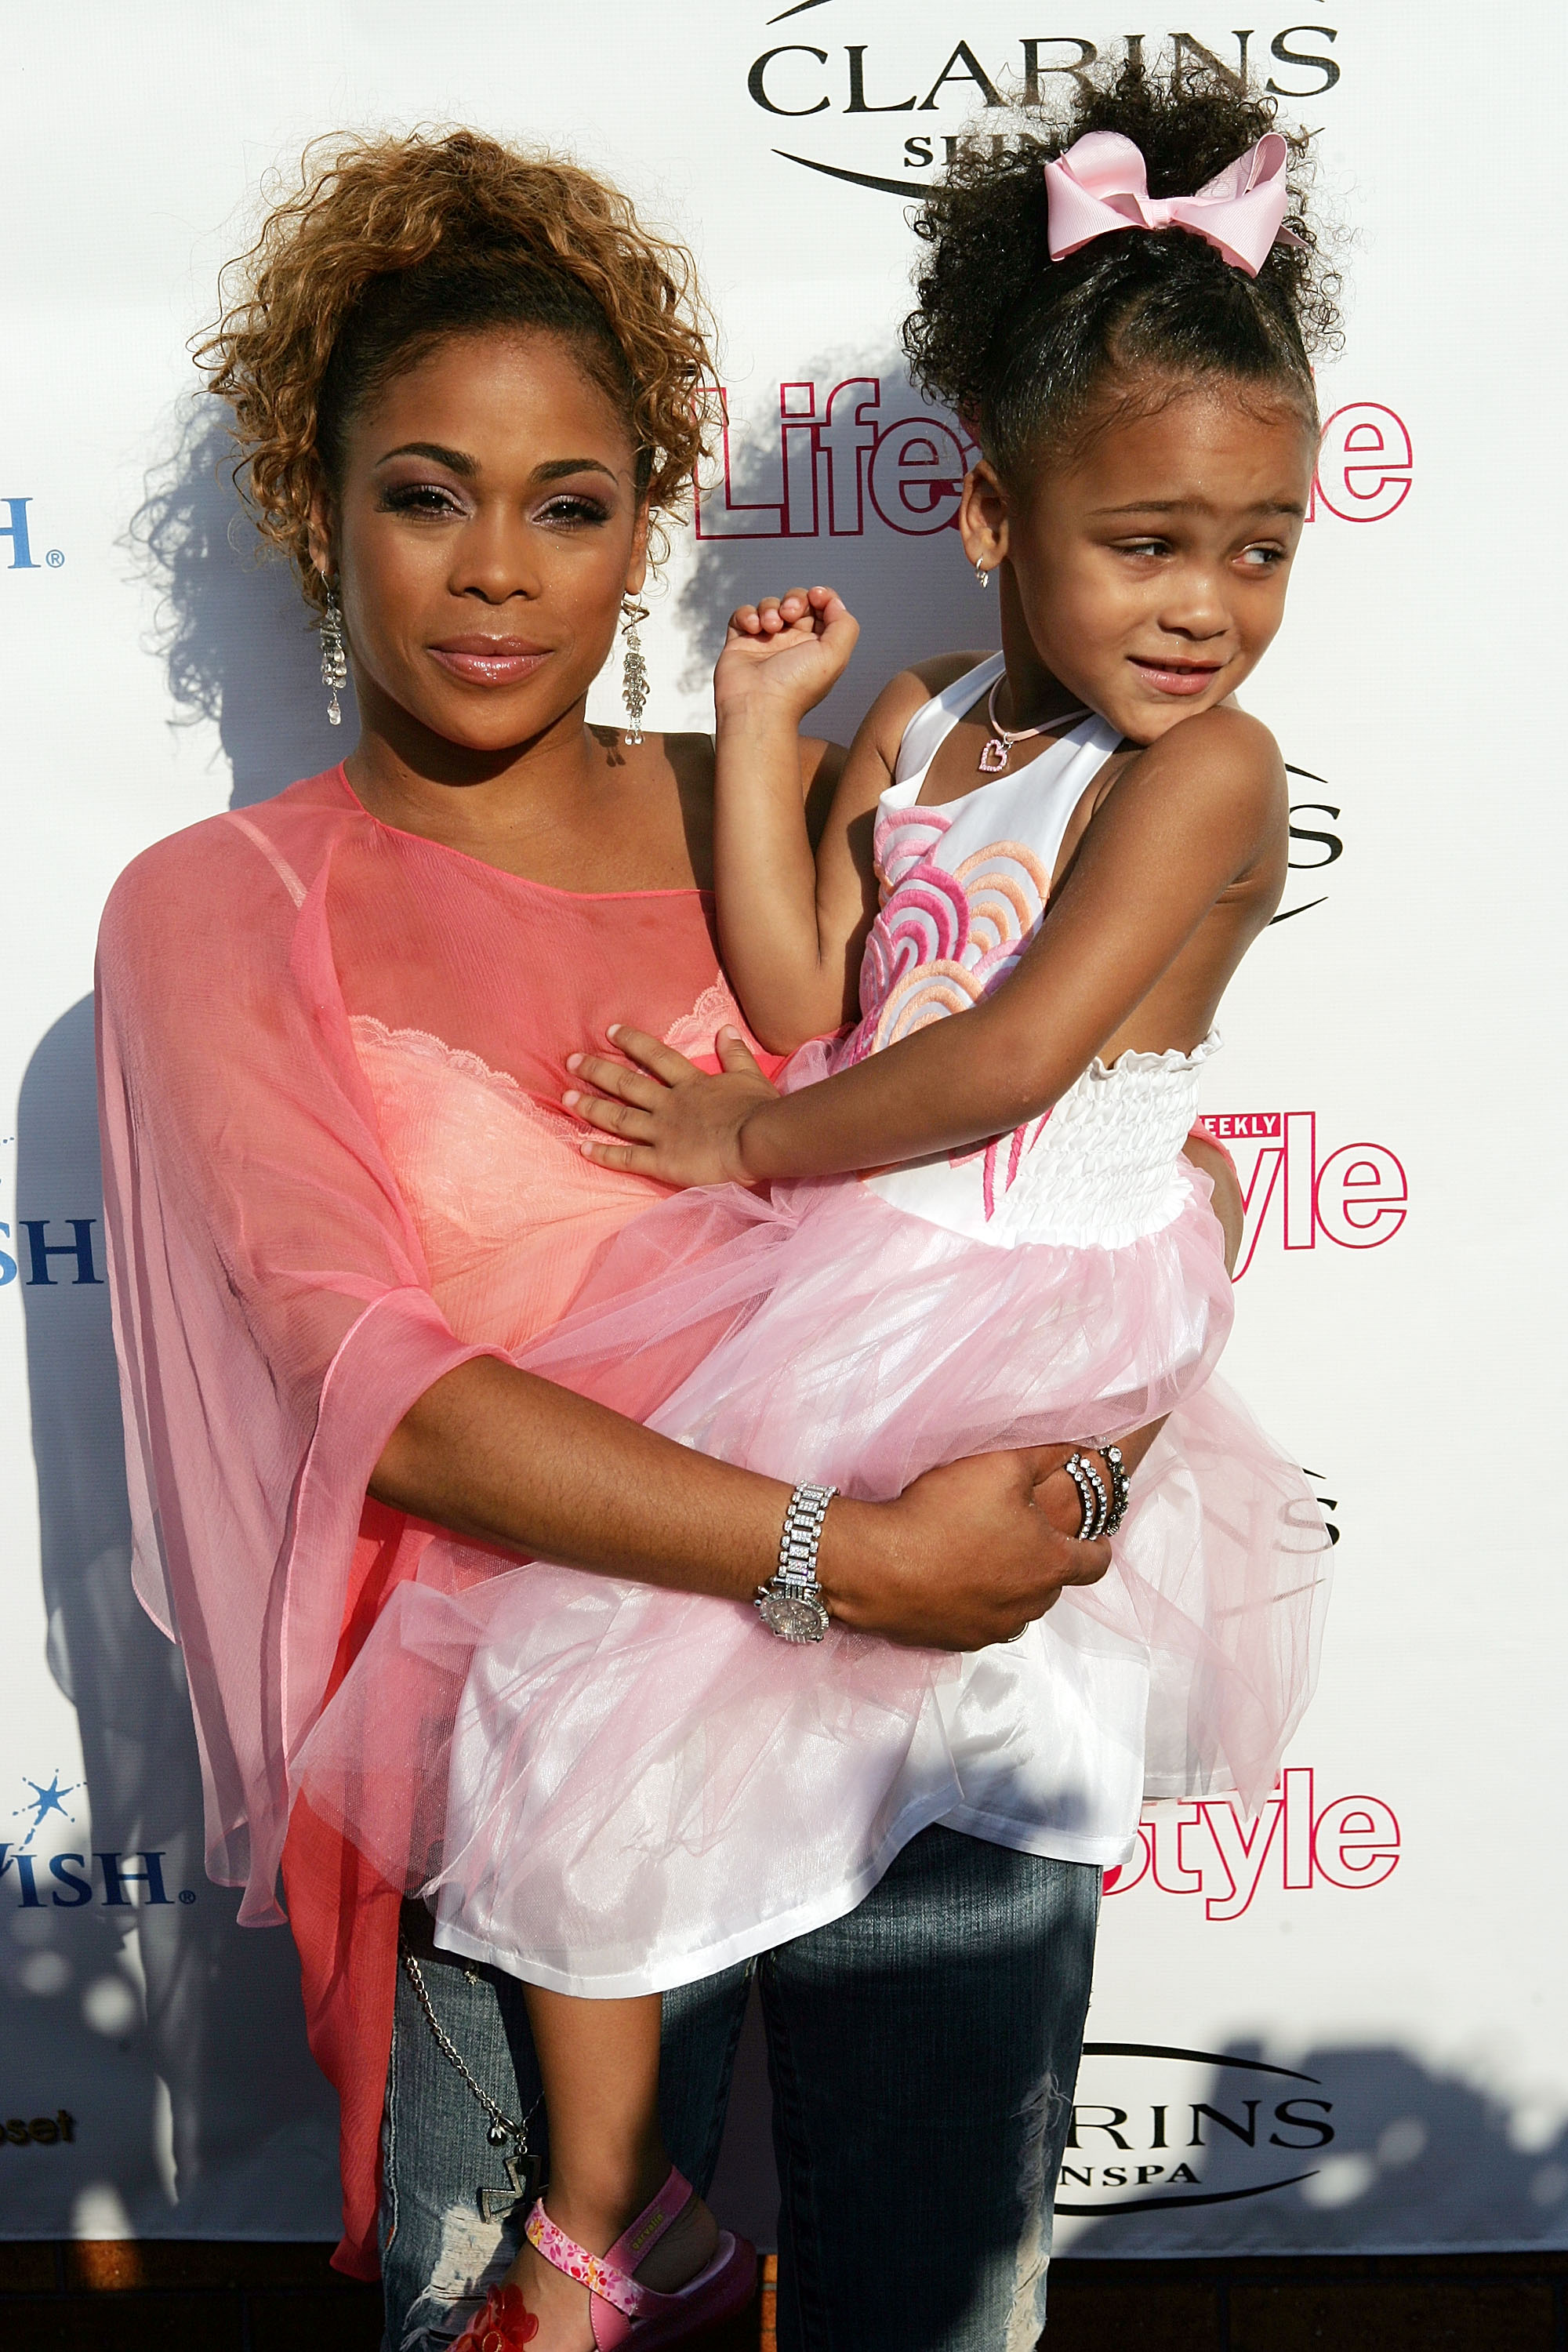 Tionne "T Boz" Watkins of TLC and her daughter, Chase Anela Rolison, arrive at a fashion show and party to benefit the Make A Wish Foundation at The Park August 2, 2005, in New York City. | Source: Getty Images